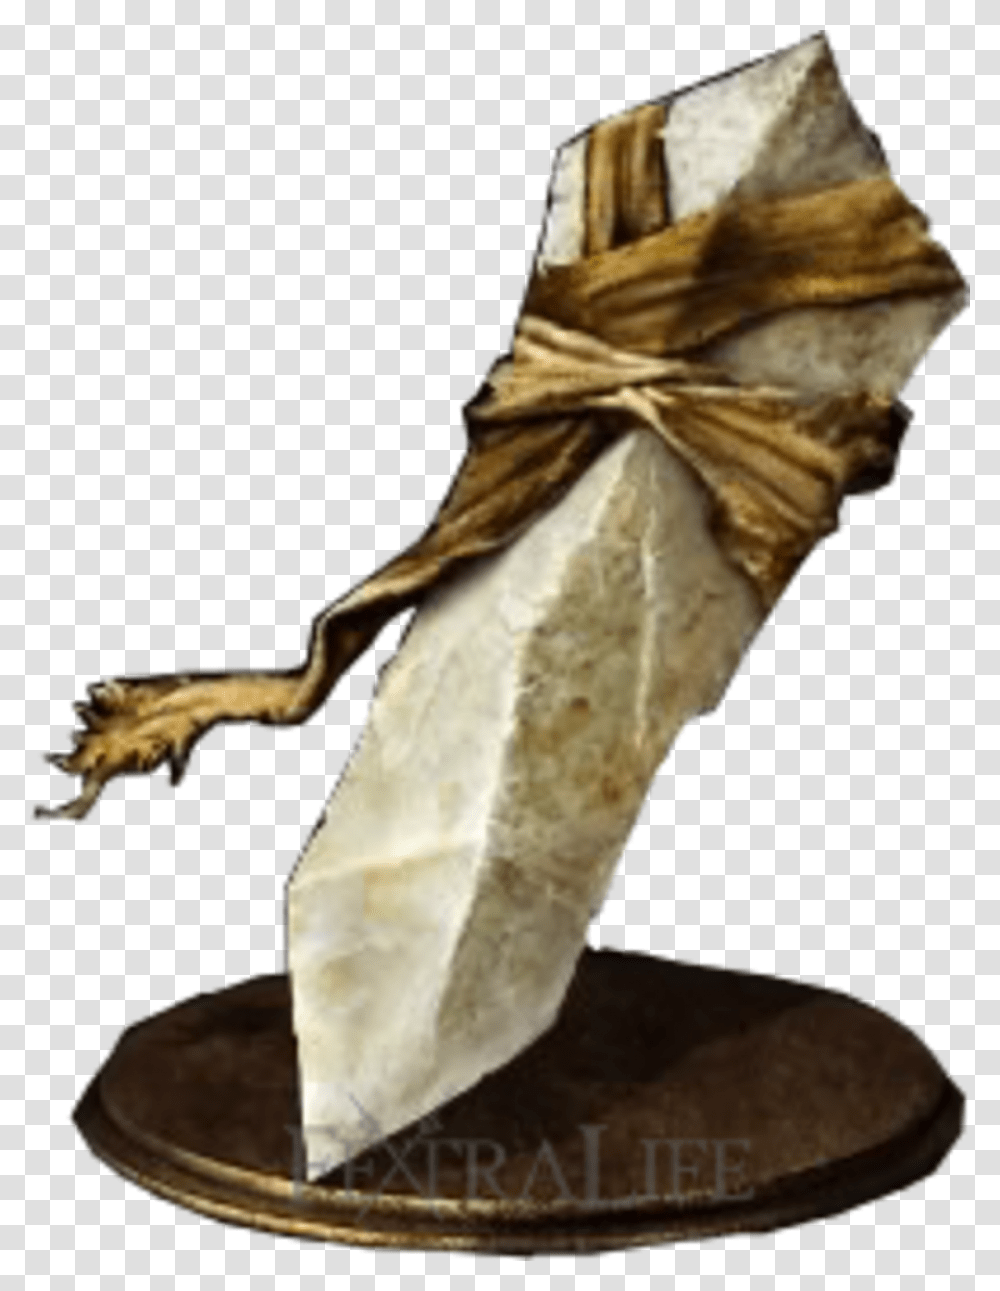 Dark Souls Real World Items, Arrowhead, Plant, Crystal, Mineral Transparent Png